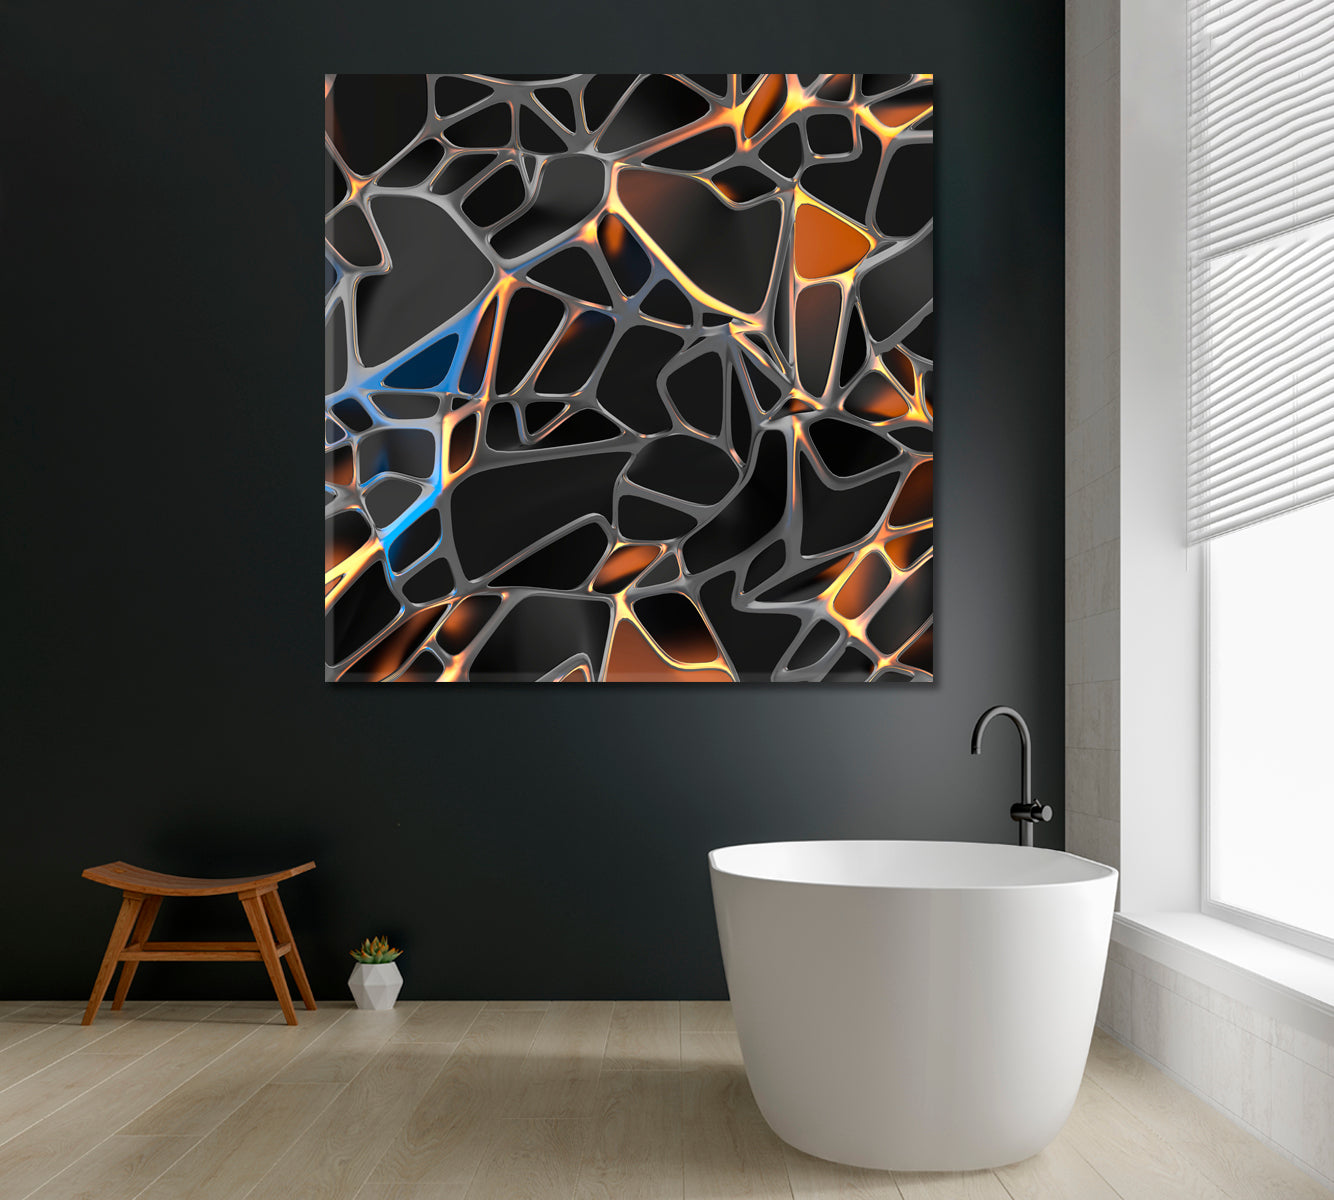 Abstract Futuristic Geometric Pattern Canvas Print ArtLexy 1 Panel 46"x46" inches 